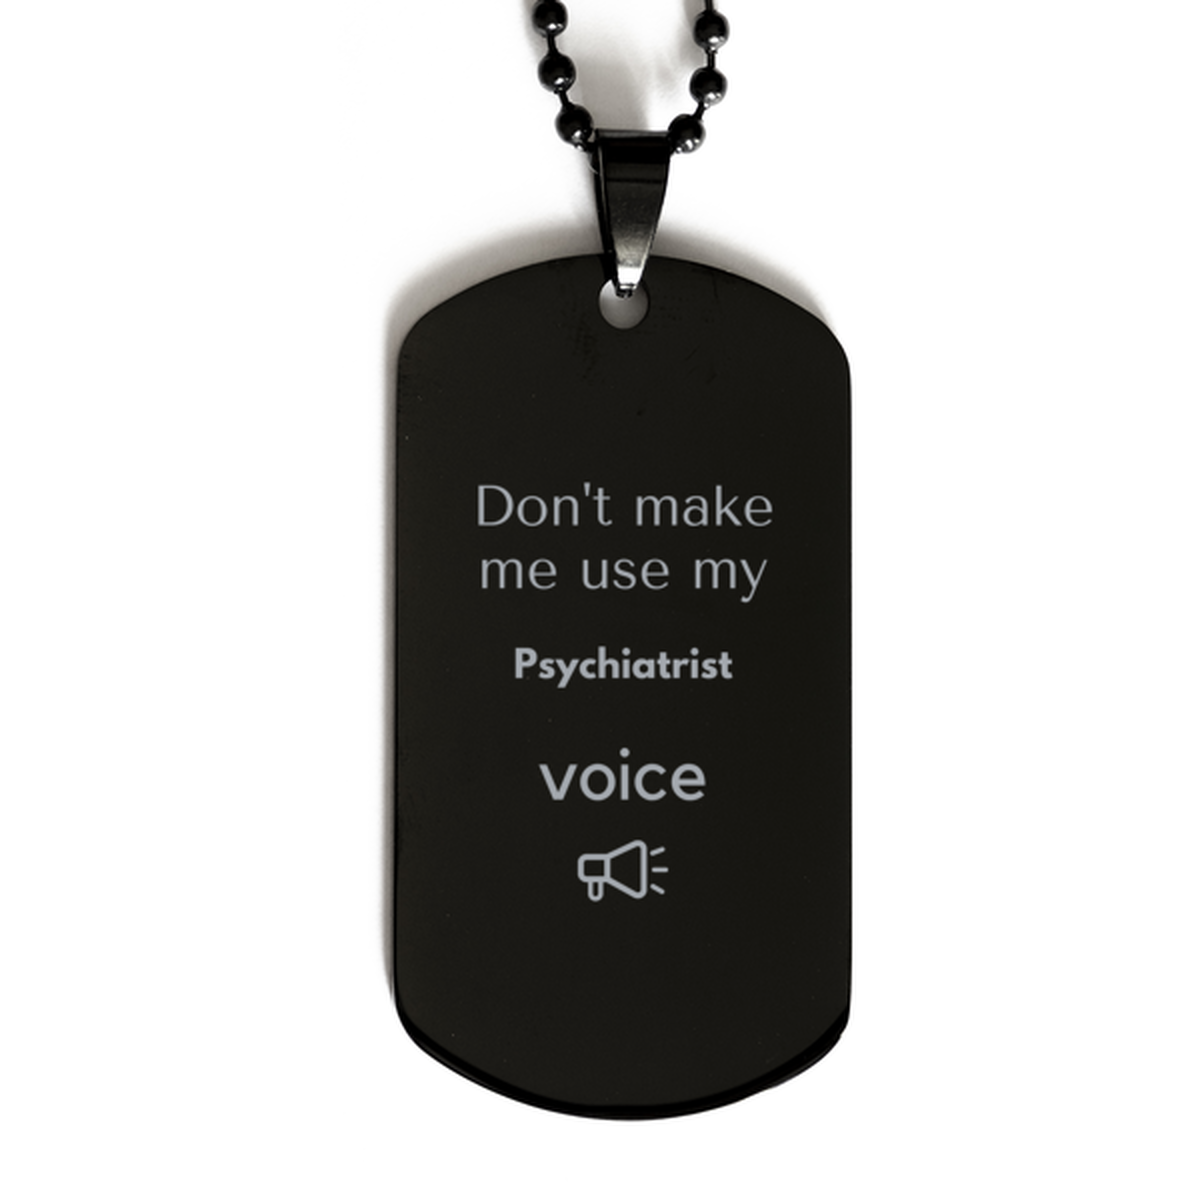 Don't make me use my Psychiatrist voice, Sarcasm Psychiatrist Gifts, Christmas Psychiatrist Black Dog Tag Birthday Unique Gifts For Psychiatrist Coworkers, Men, Women, Colleague, Friends